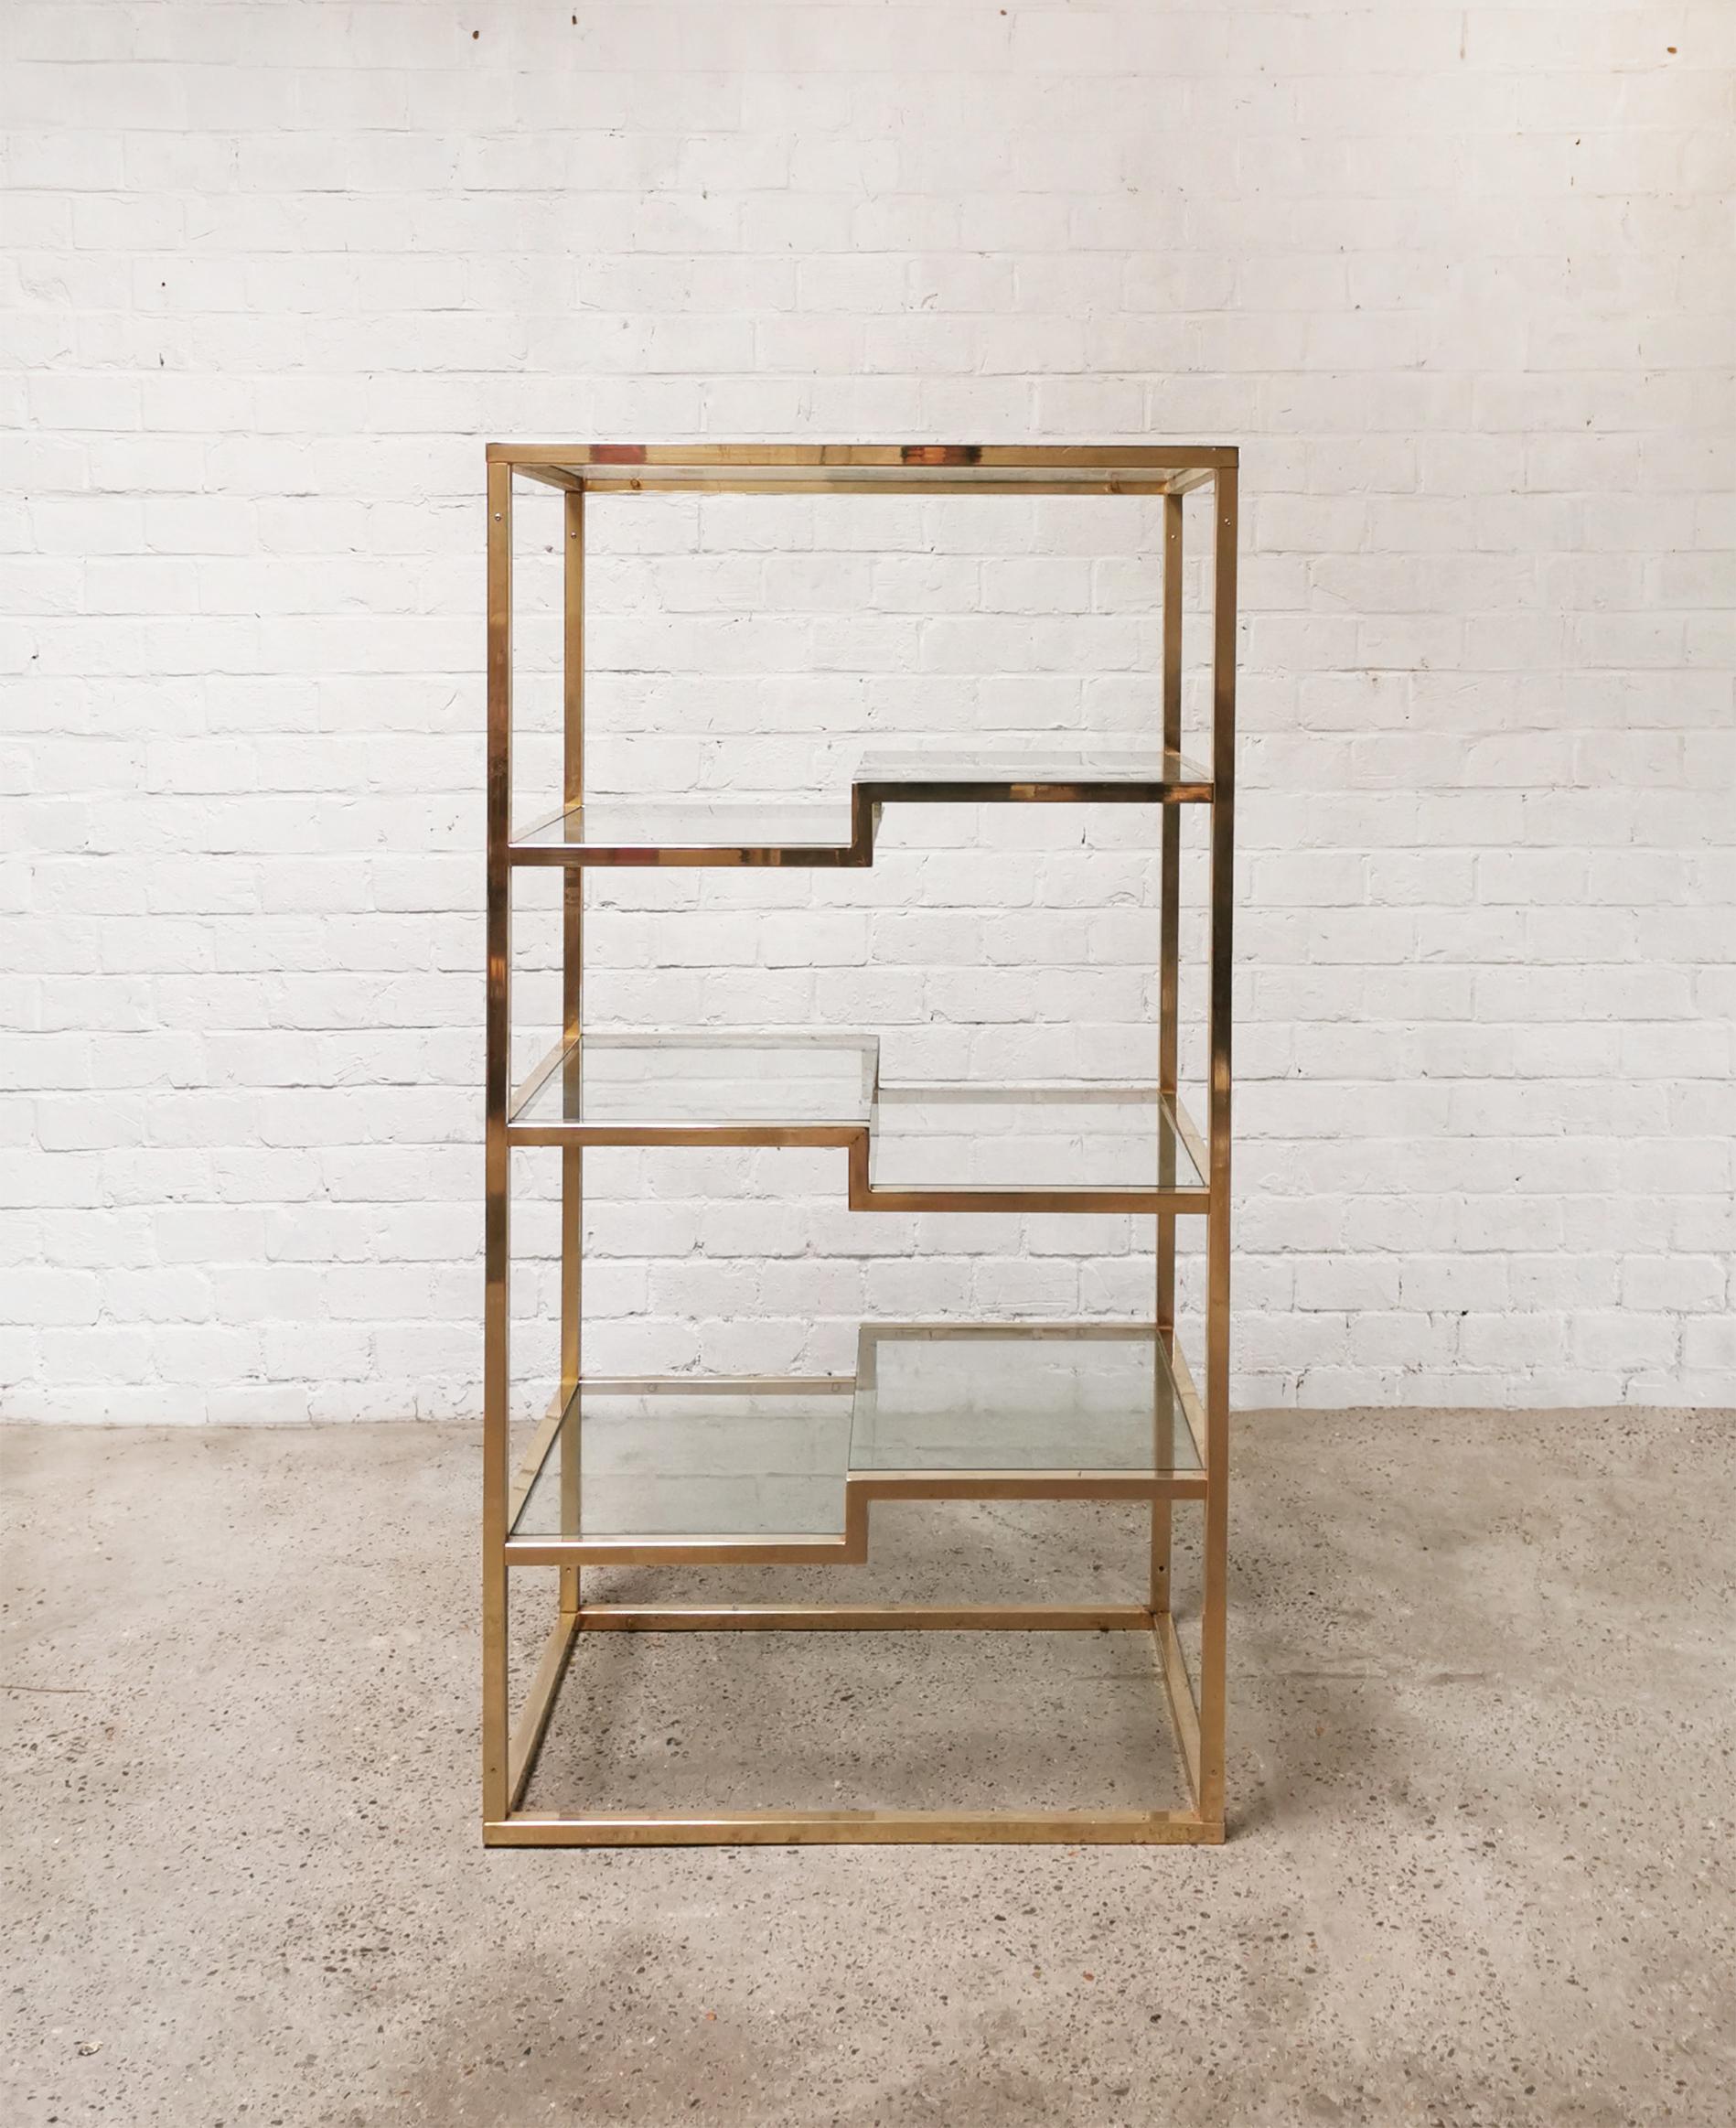 Belgian Vintage Geometric Gold-plated Shelving Unit by Belgo Chrom, 1970s For Sale